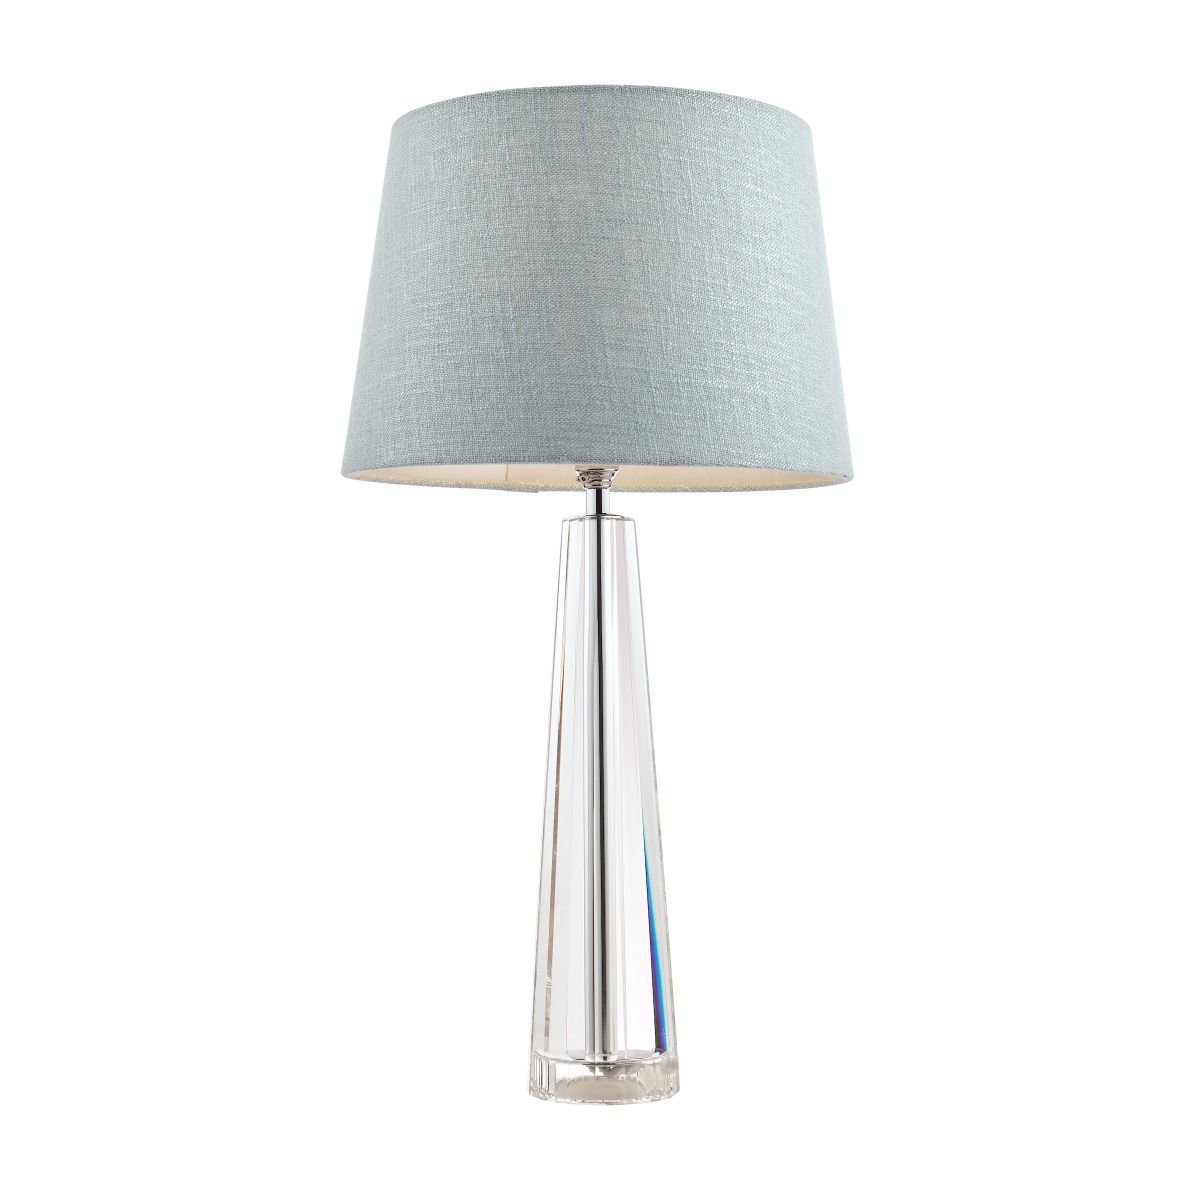 Crystal Table Lamps | Lights4Living